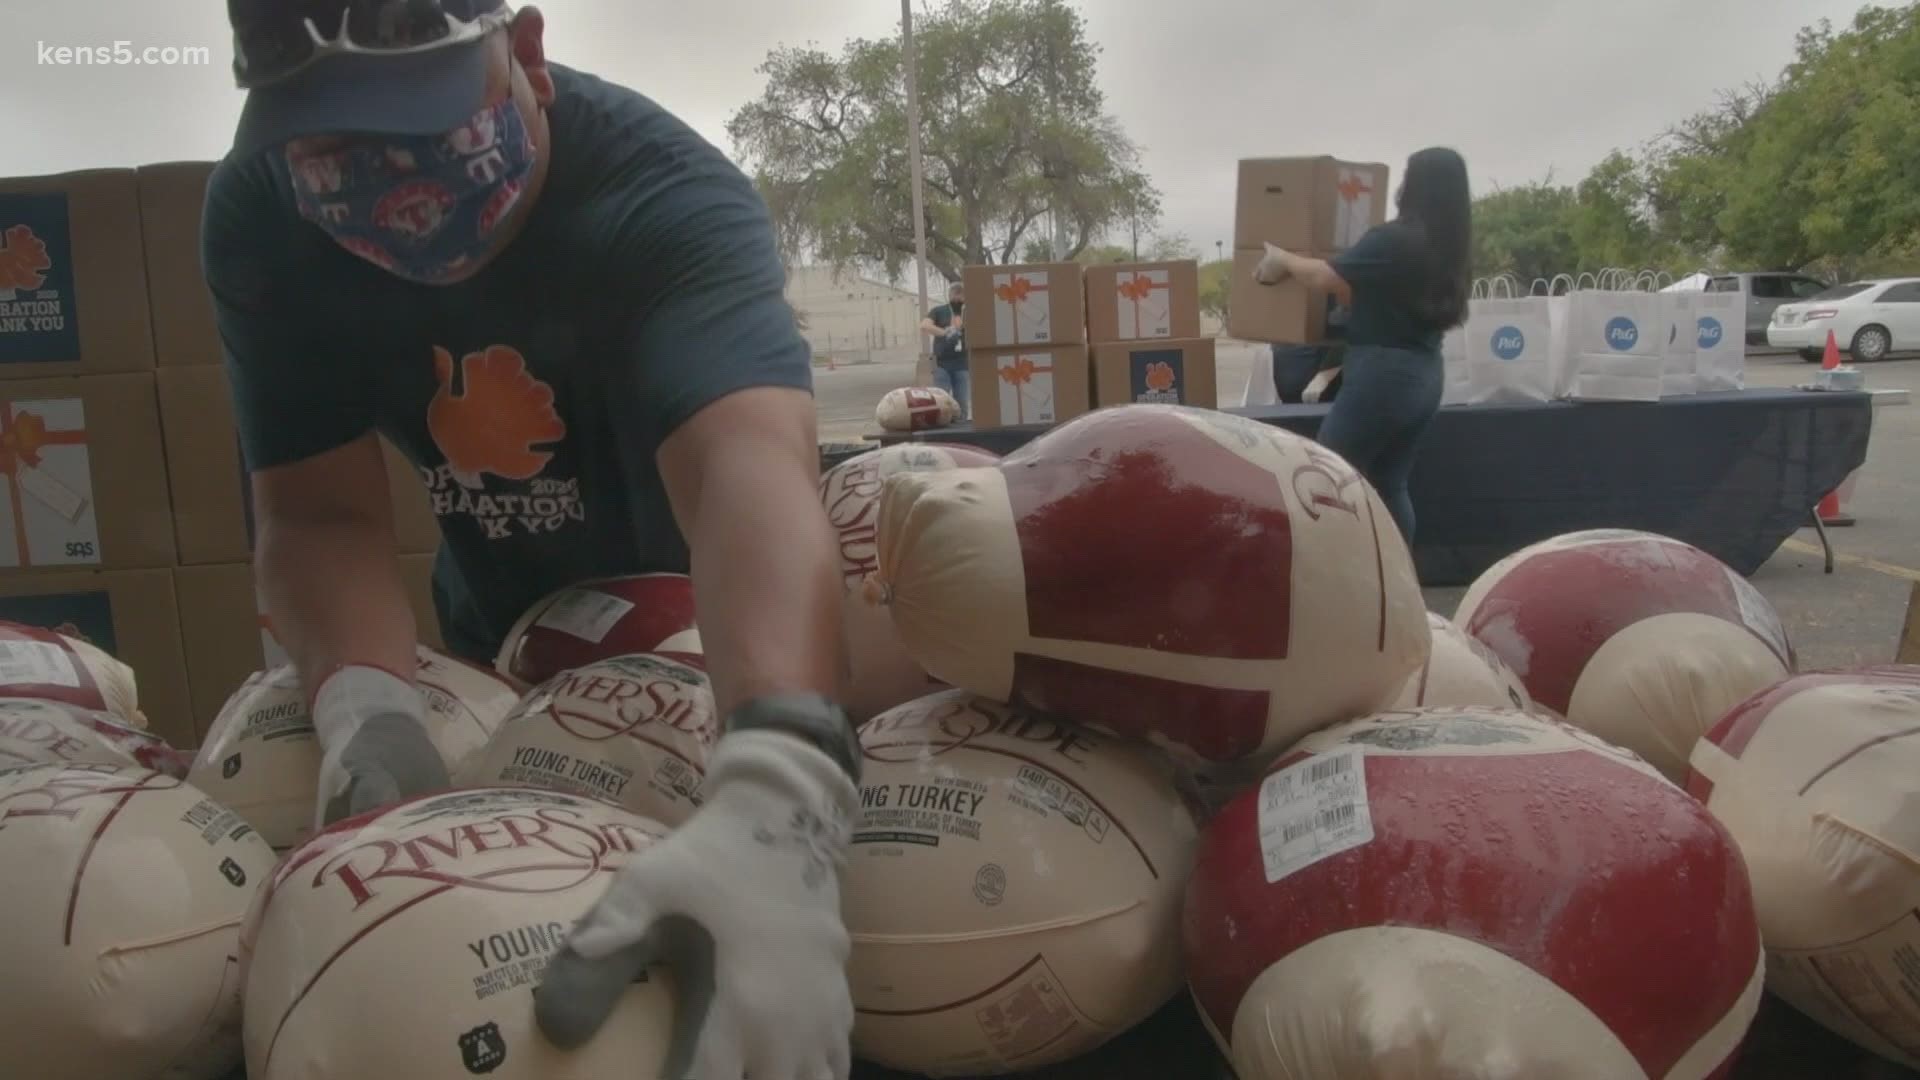 Operation Homefront helped to provide 1,600 meals to military families across Texas.